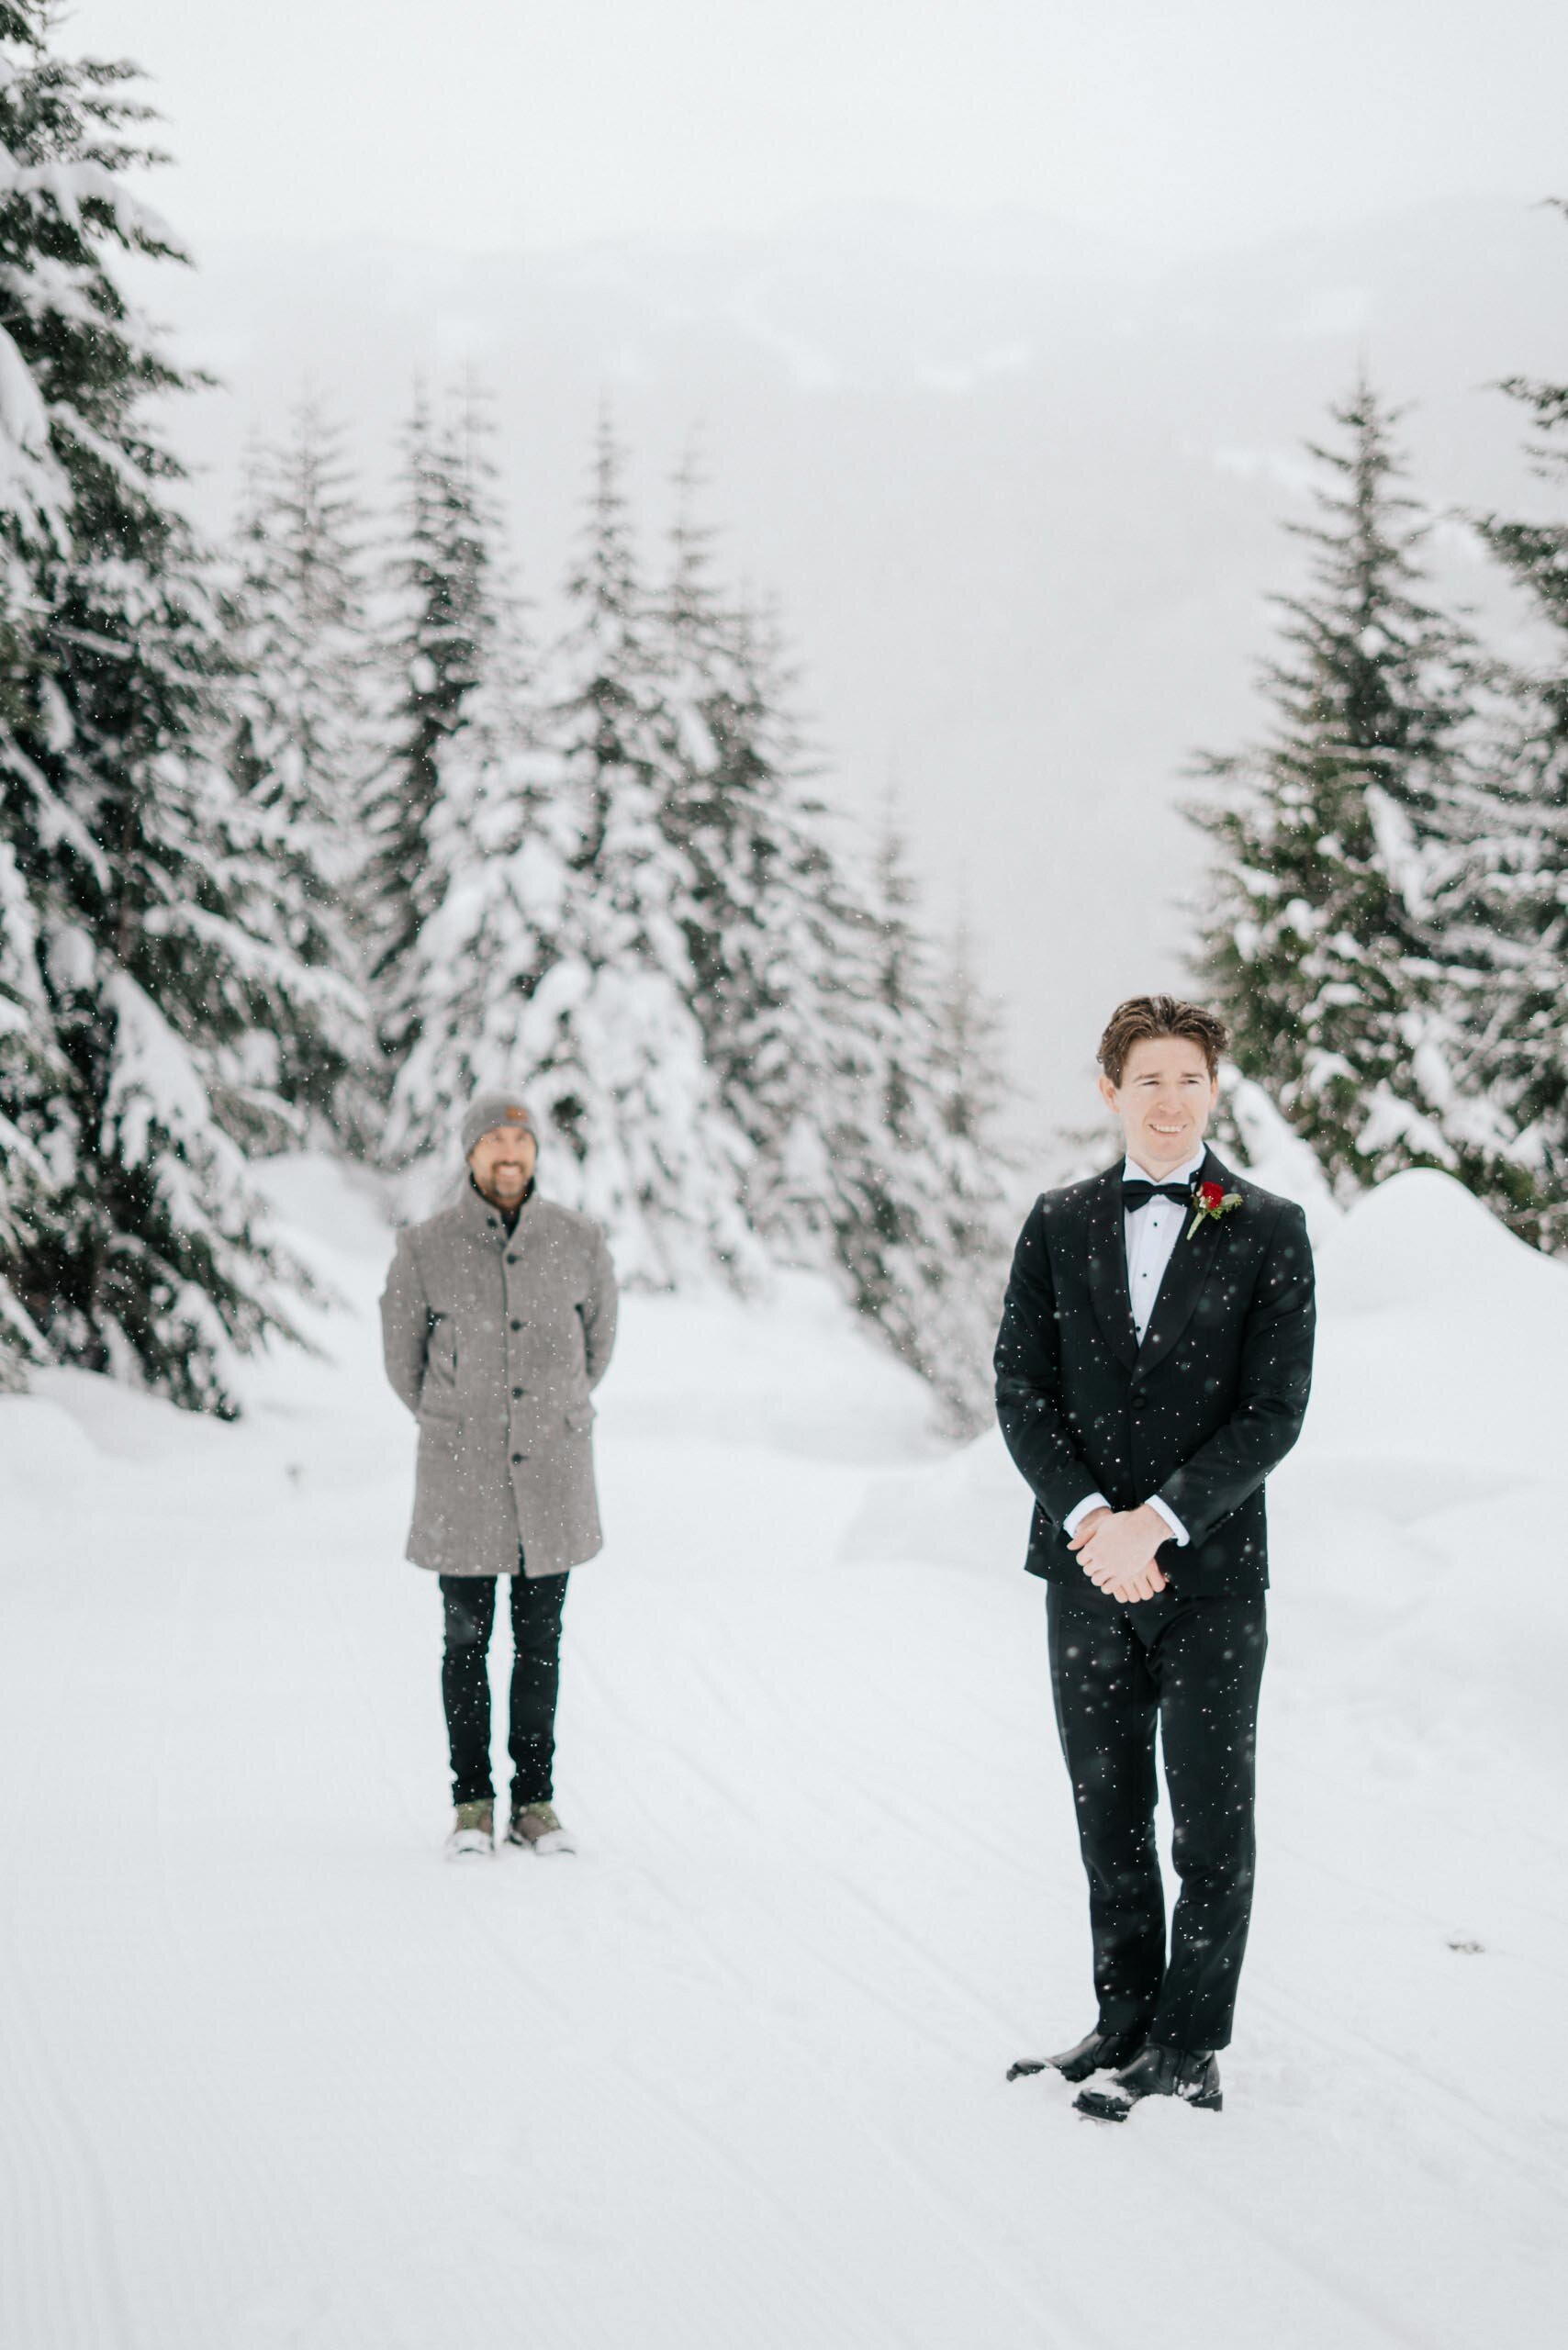 A groom waits for his bride in the snow, among snowy covered evergreens in Whistler BC.